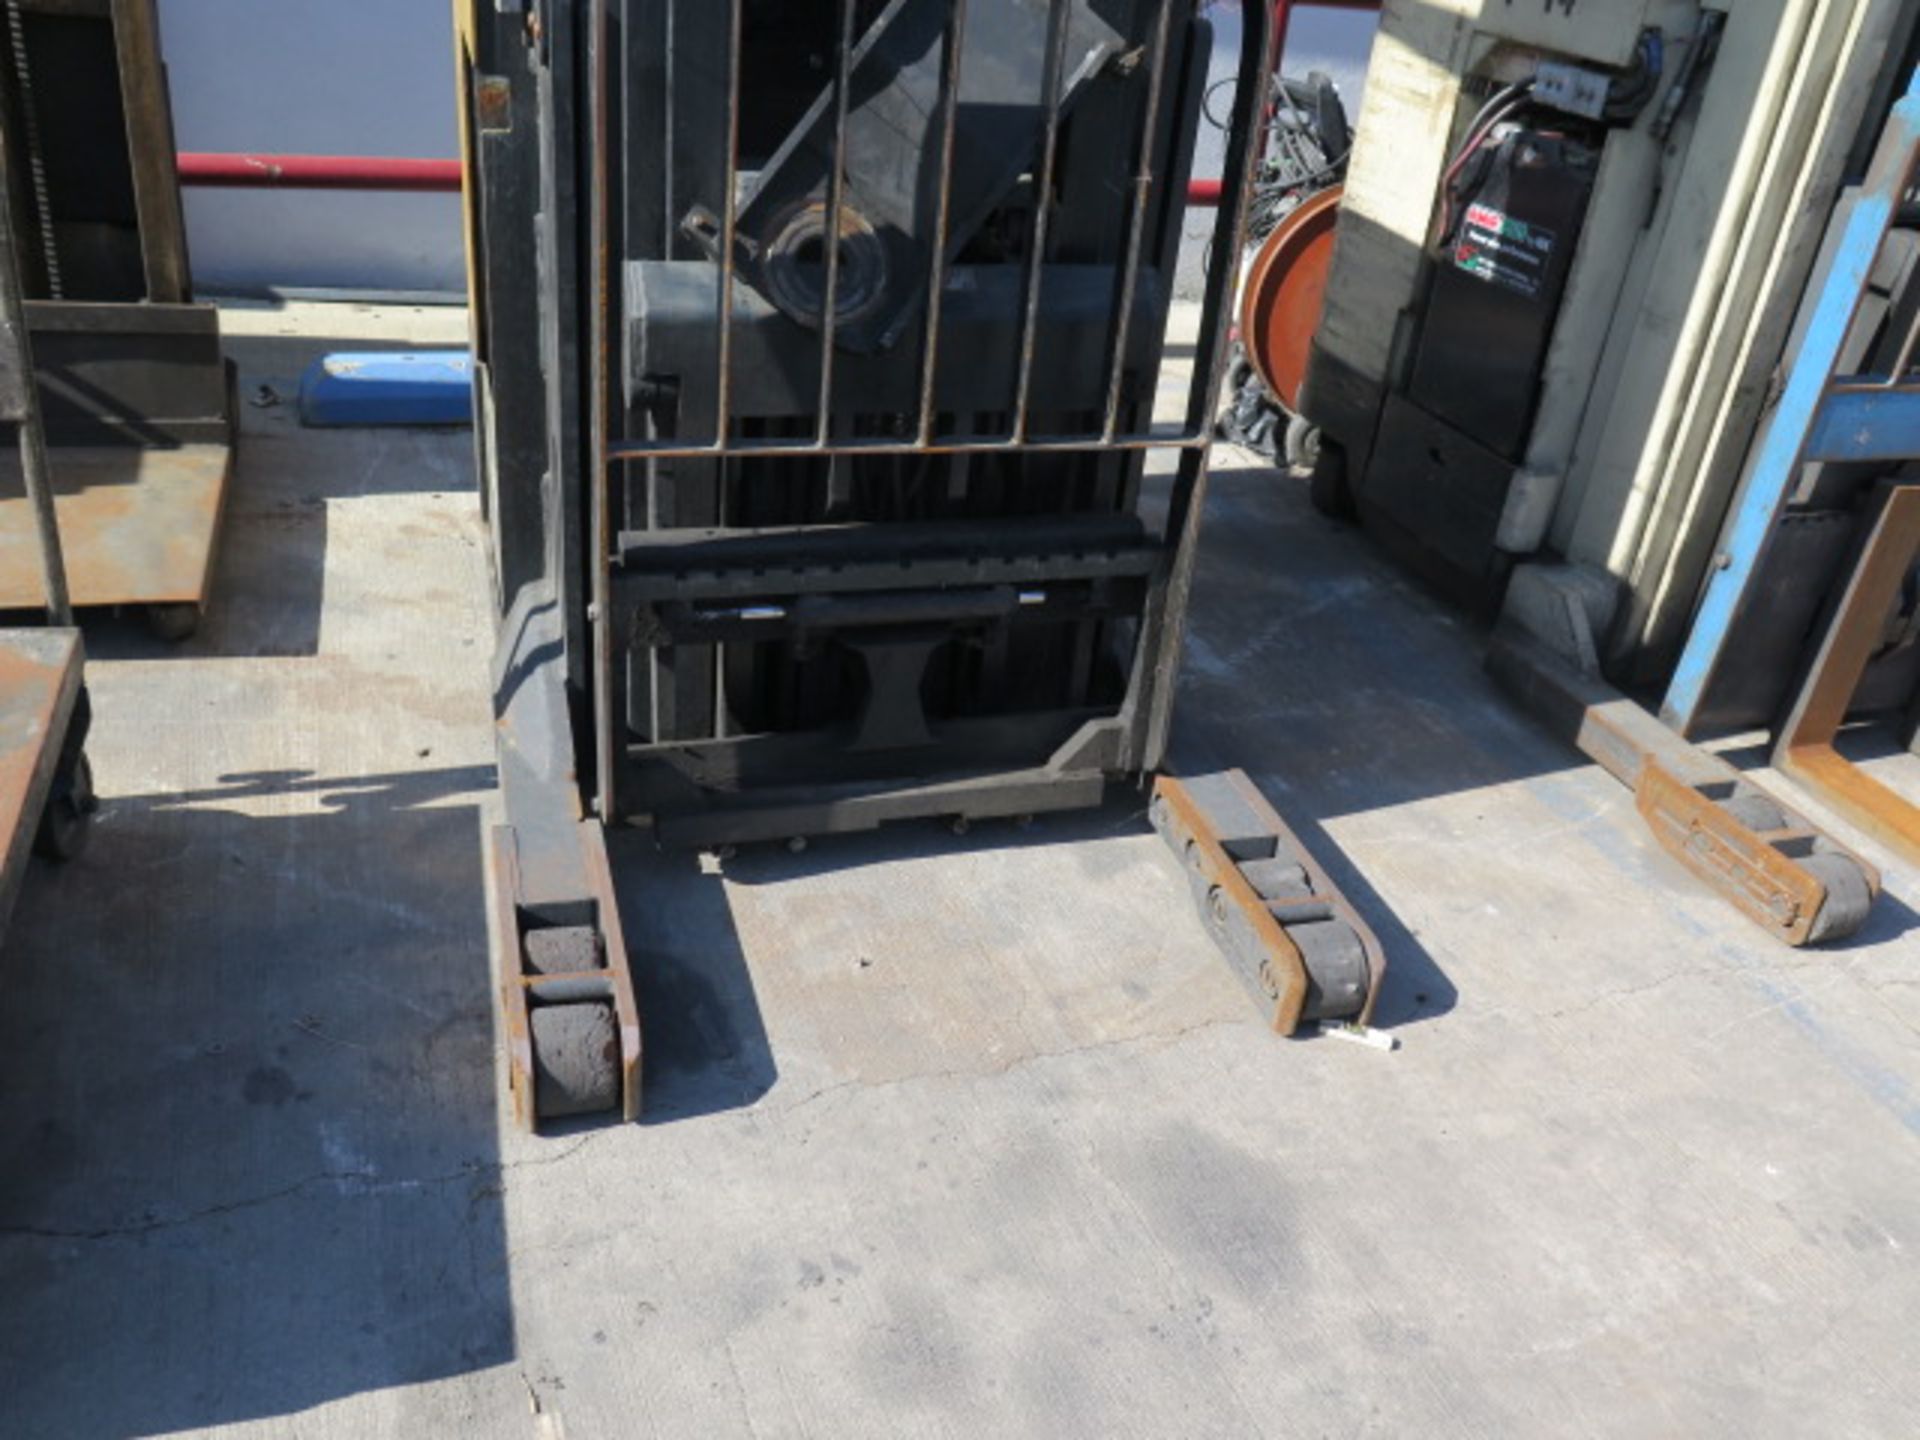 Komatsu Stand-In Electric Forklift (NEEDS WORK) (SOLD AS-IS - NO WARRANTY) - Image 3 of 9